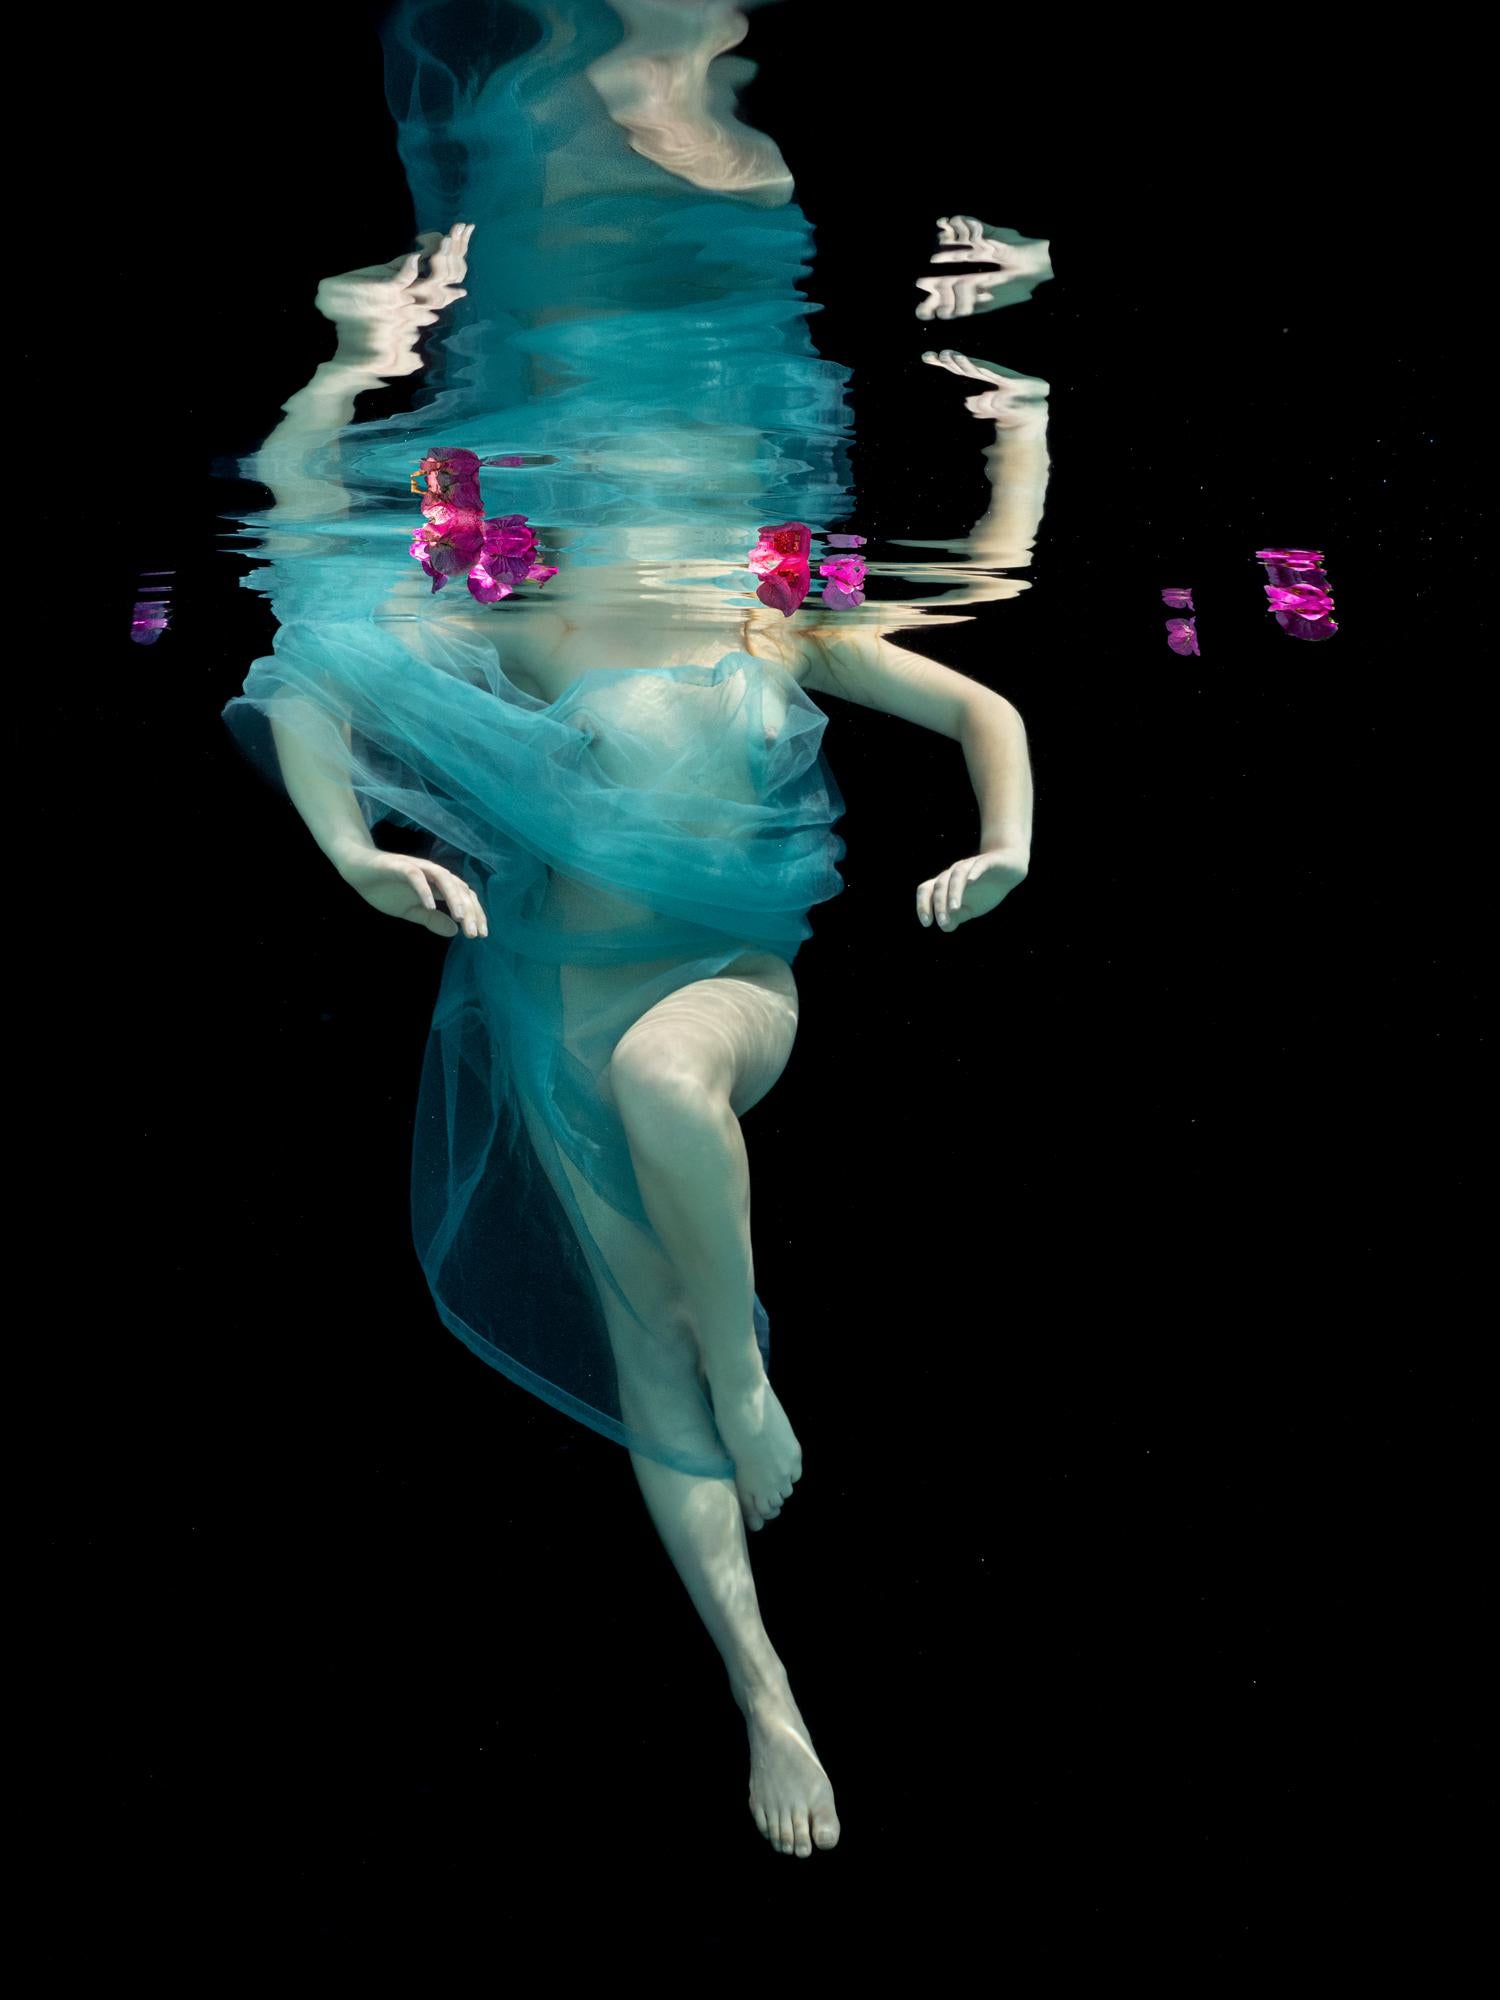 Alex Sher Color Photograph - Dancing Flowers - underwater nude photograph - print on paper 24” x 18”